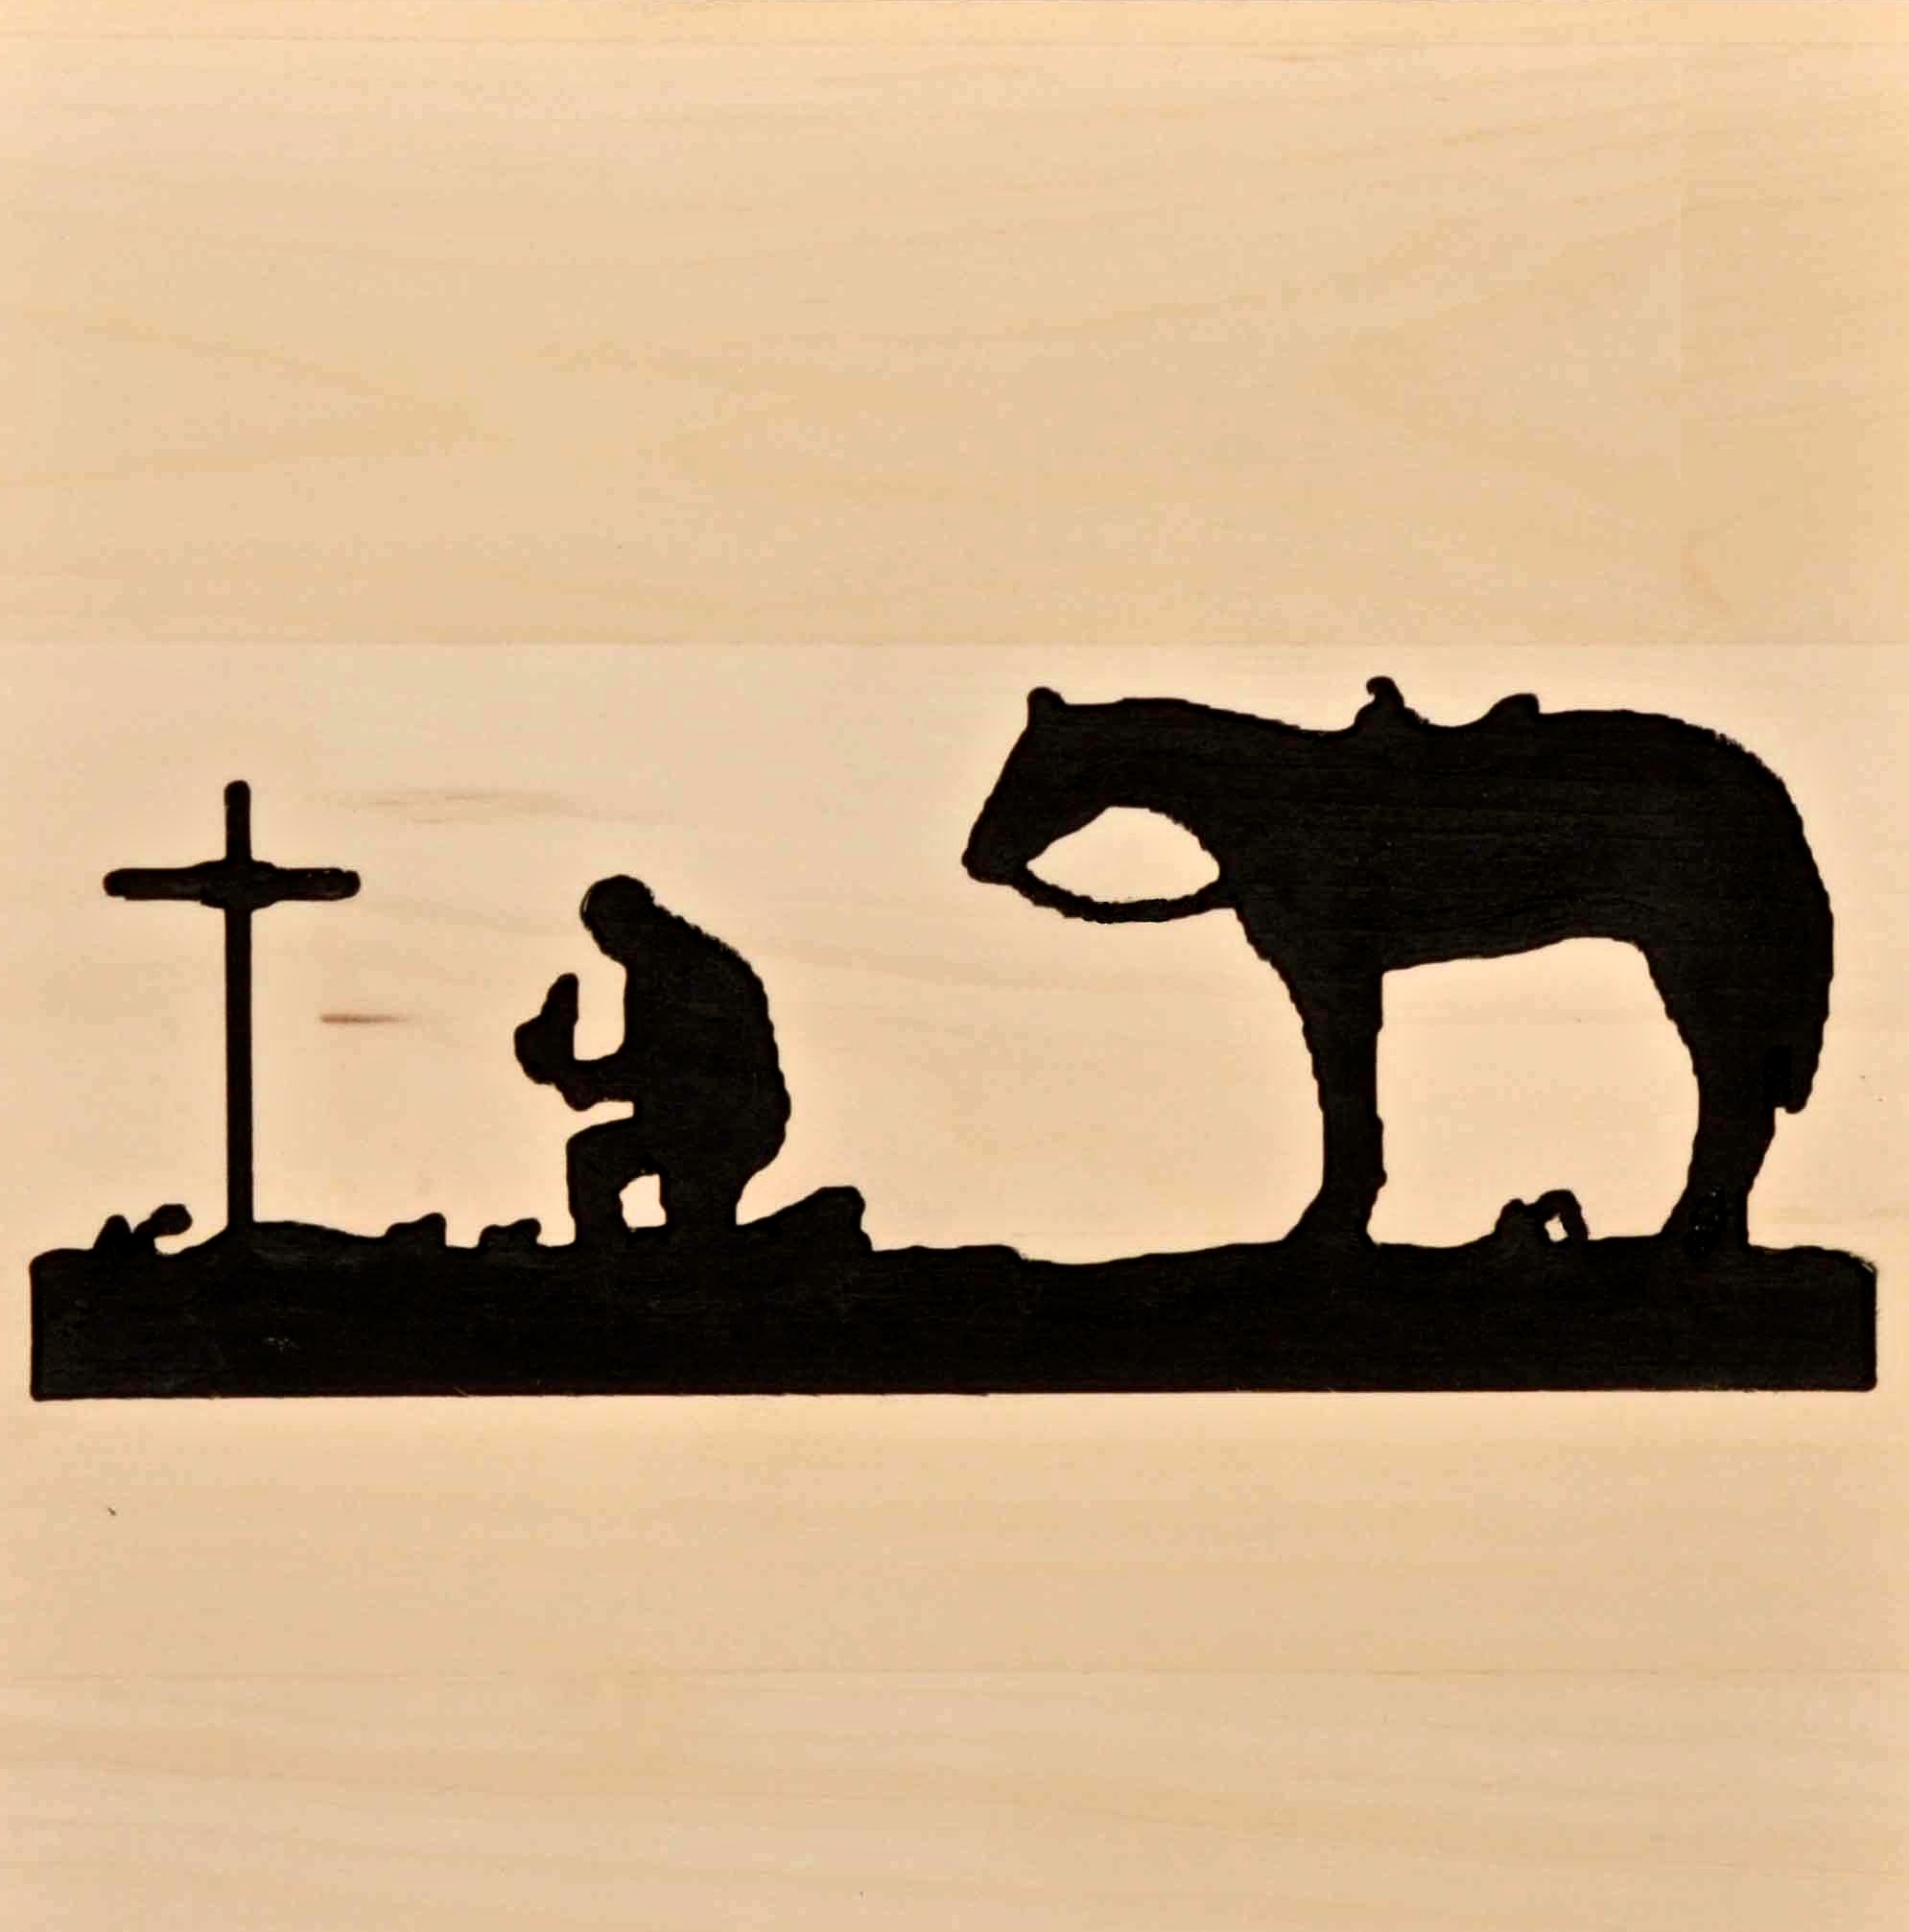 Praying Cowboy Silhouettes Accent Our Rustic Furniture Designs ...